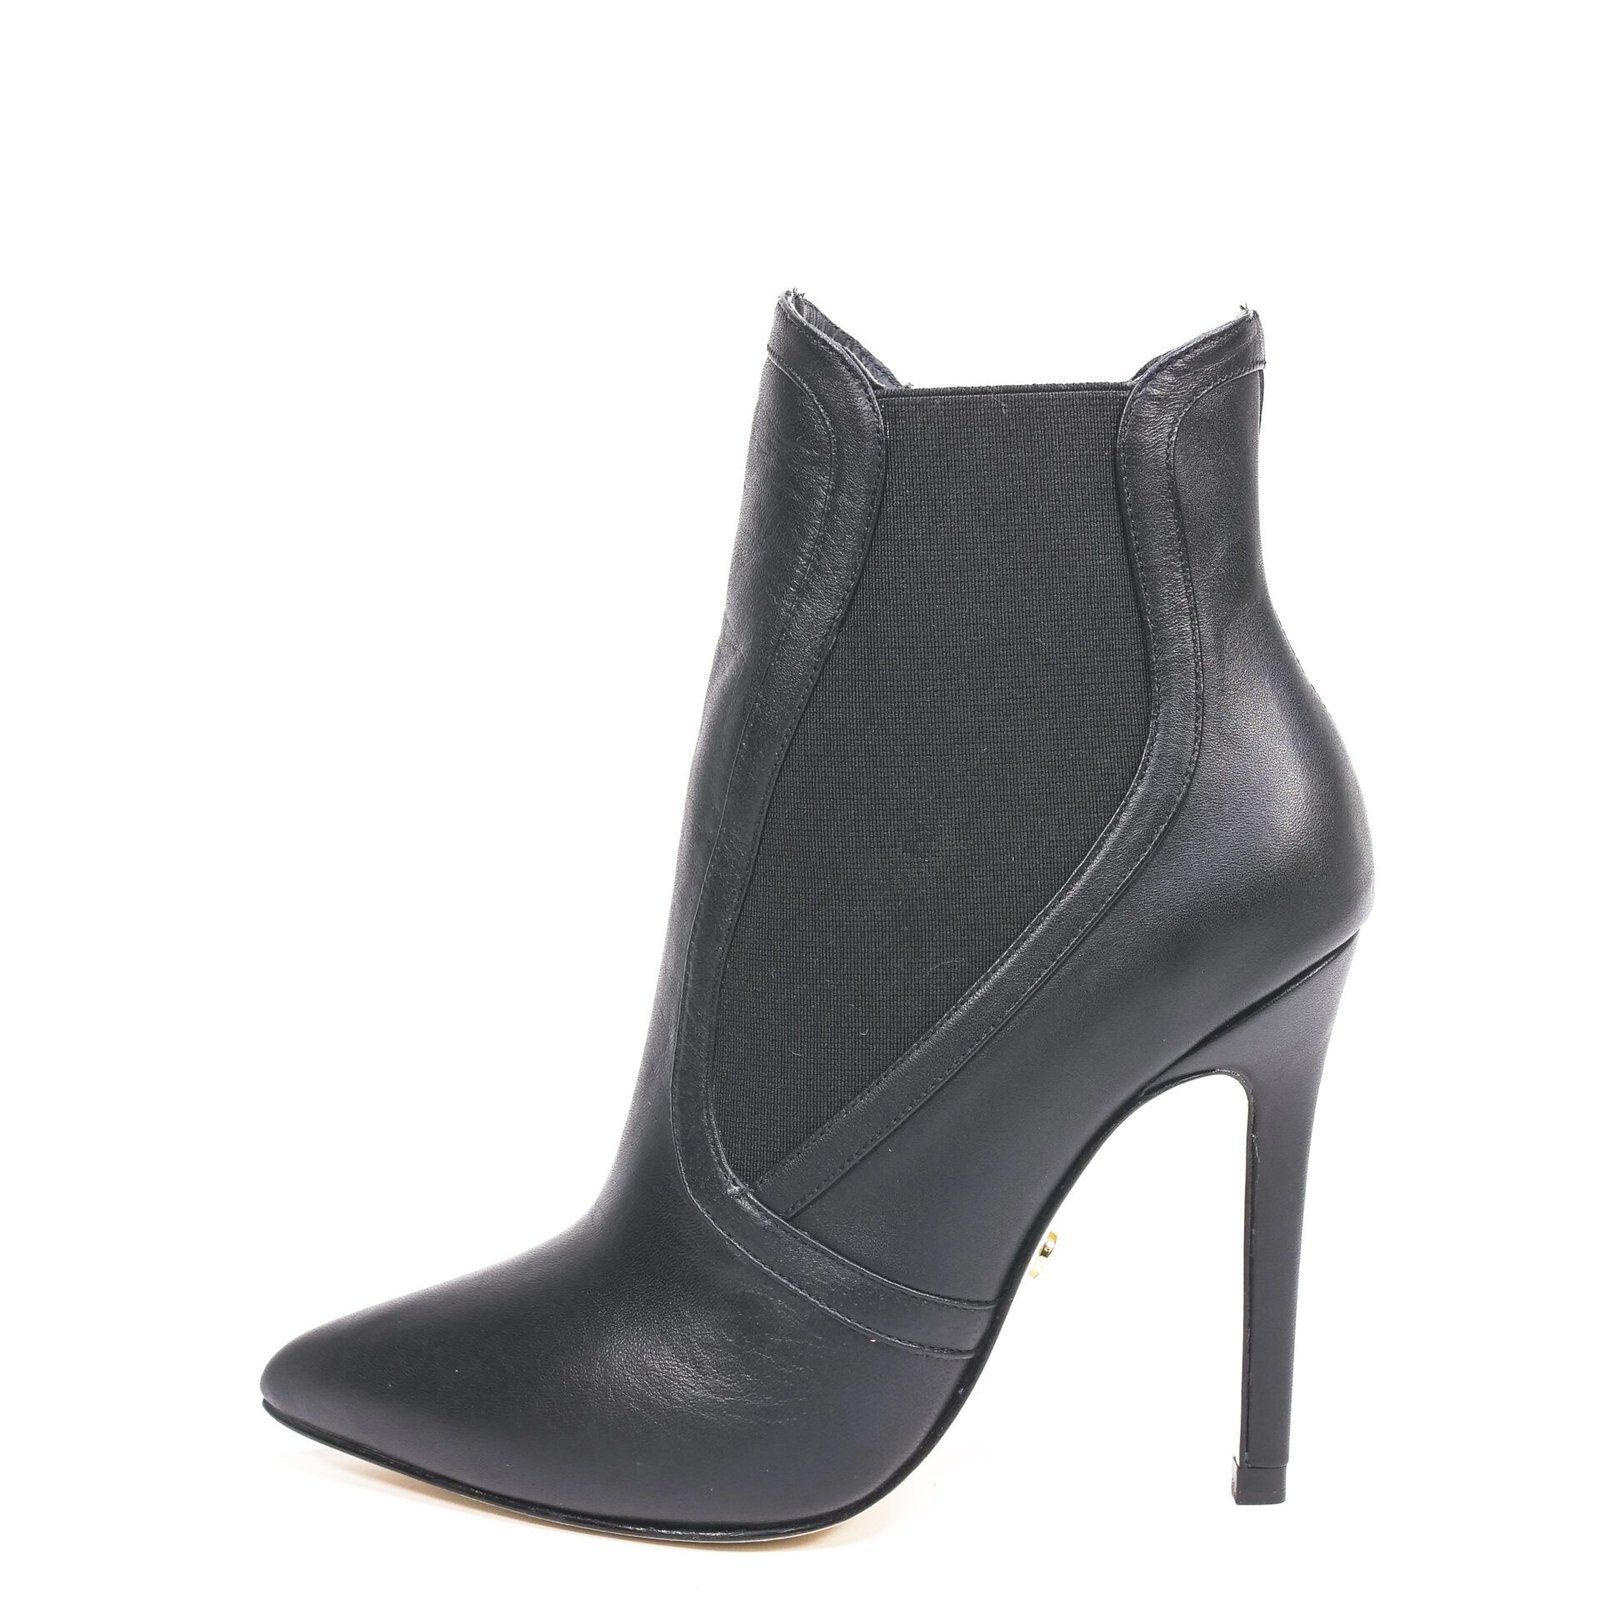 Black Pointed toe boots